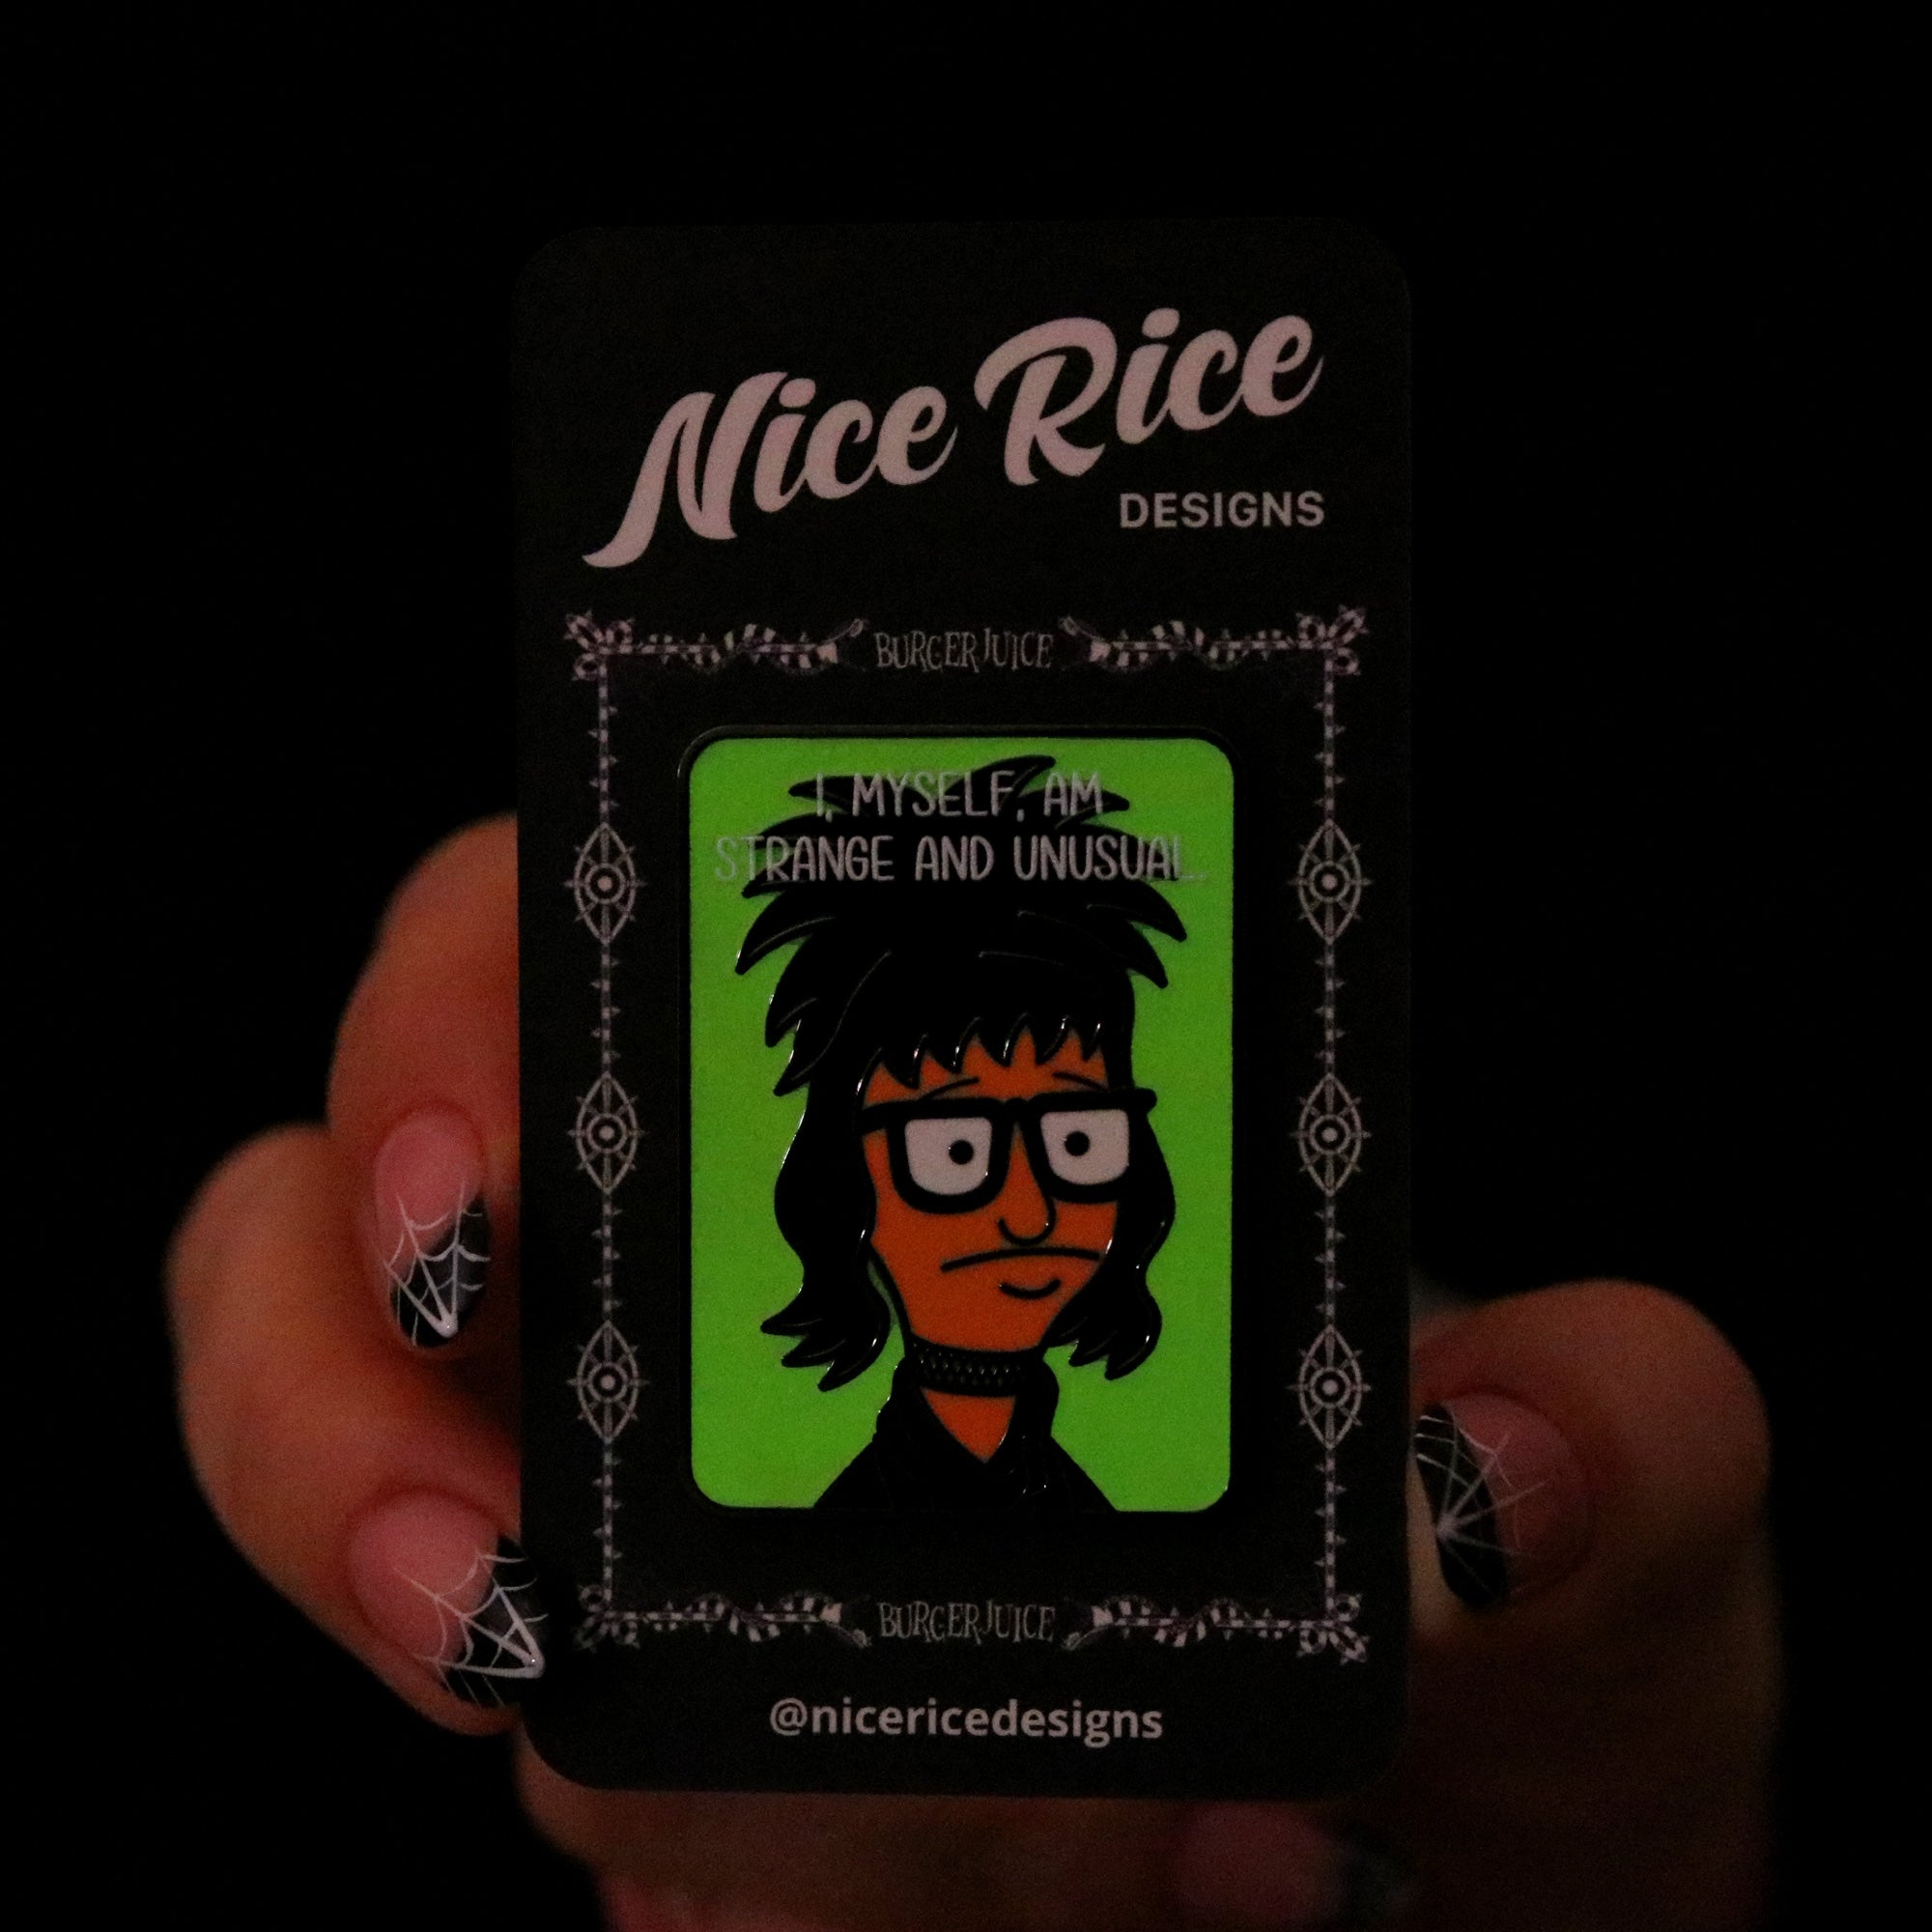 Strange and Unusual Pin by Nice Rice Designs